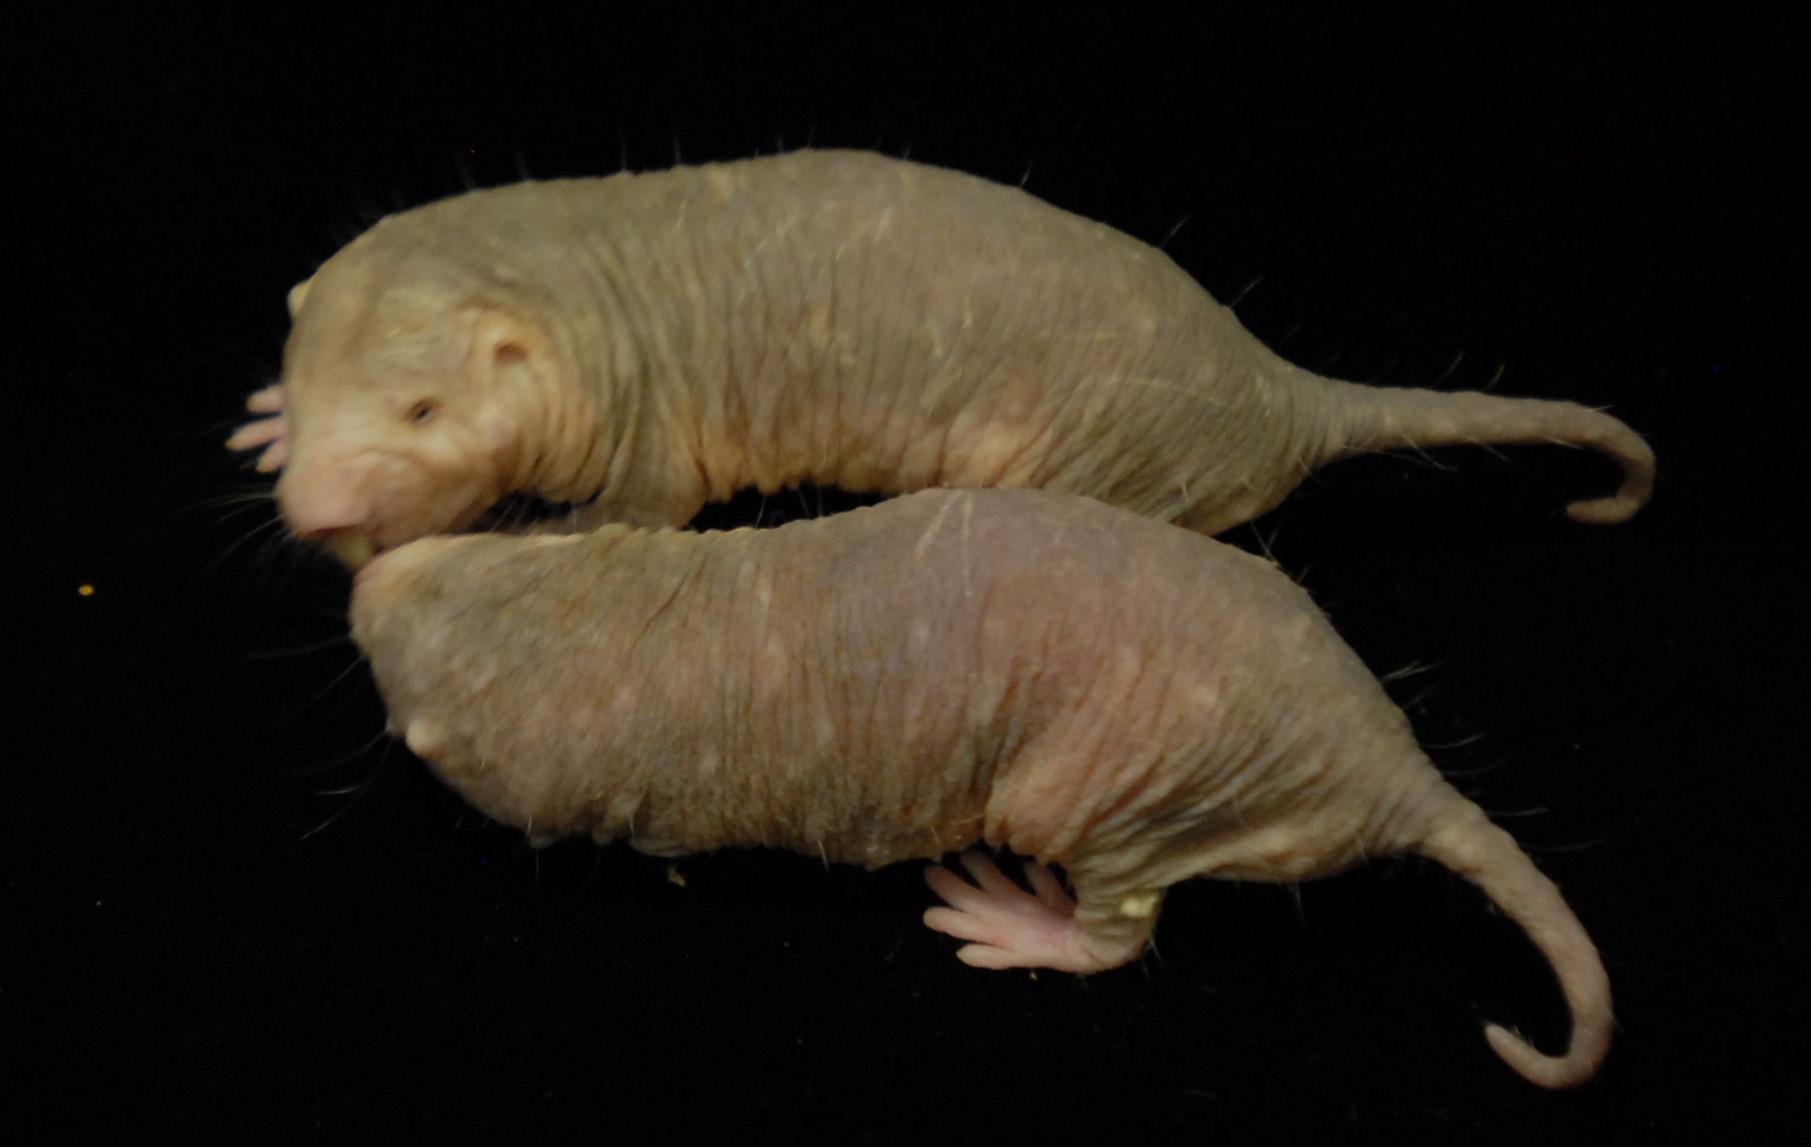 To Deal With Their Miserable Lives, Naked Mole Rats Have Evolved To Feel No Pain